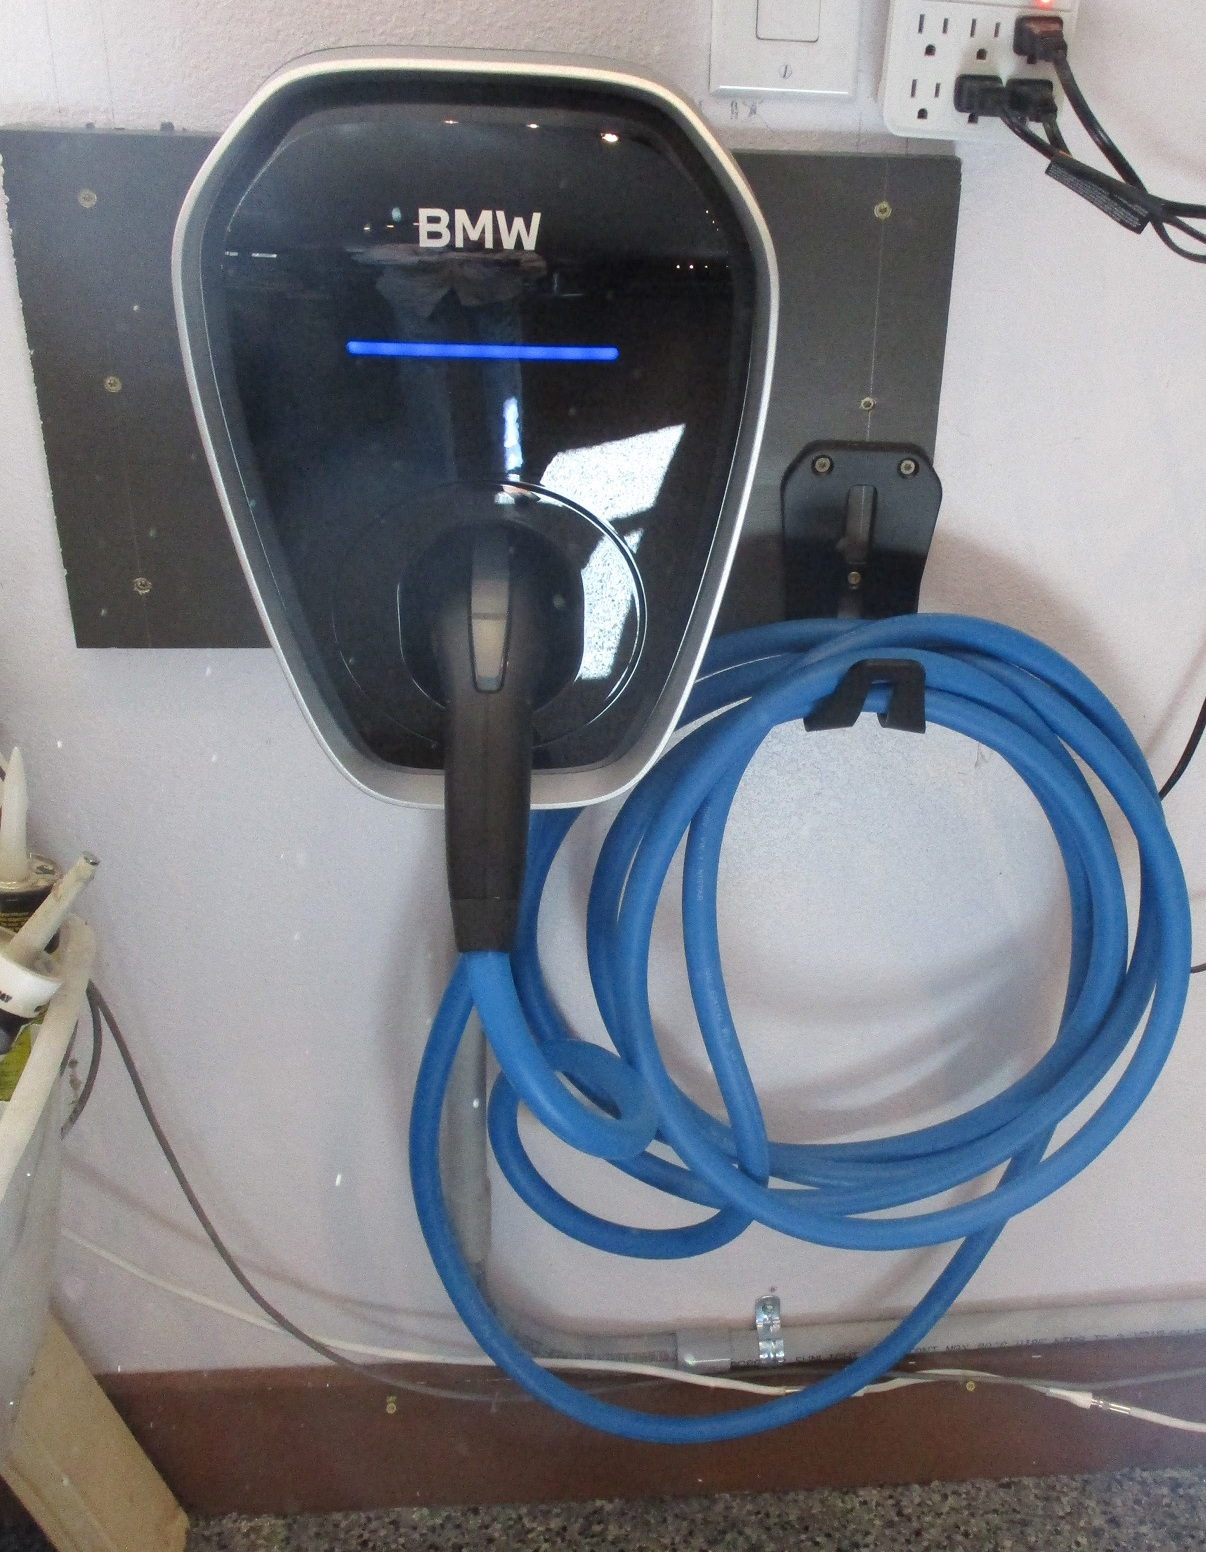 BMW home wallbox charger install